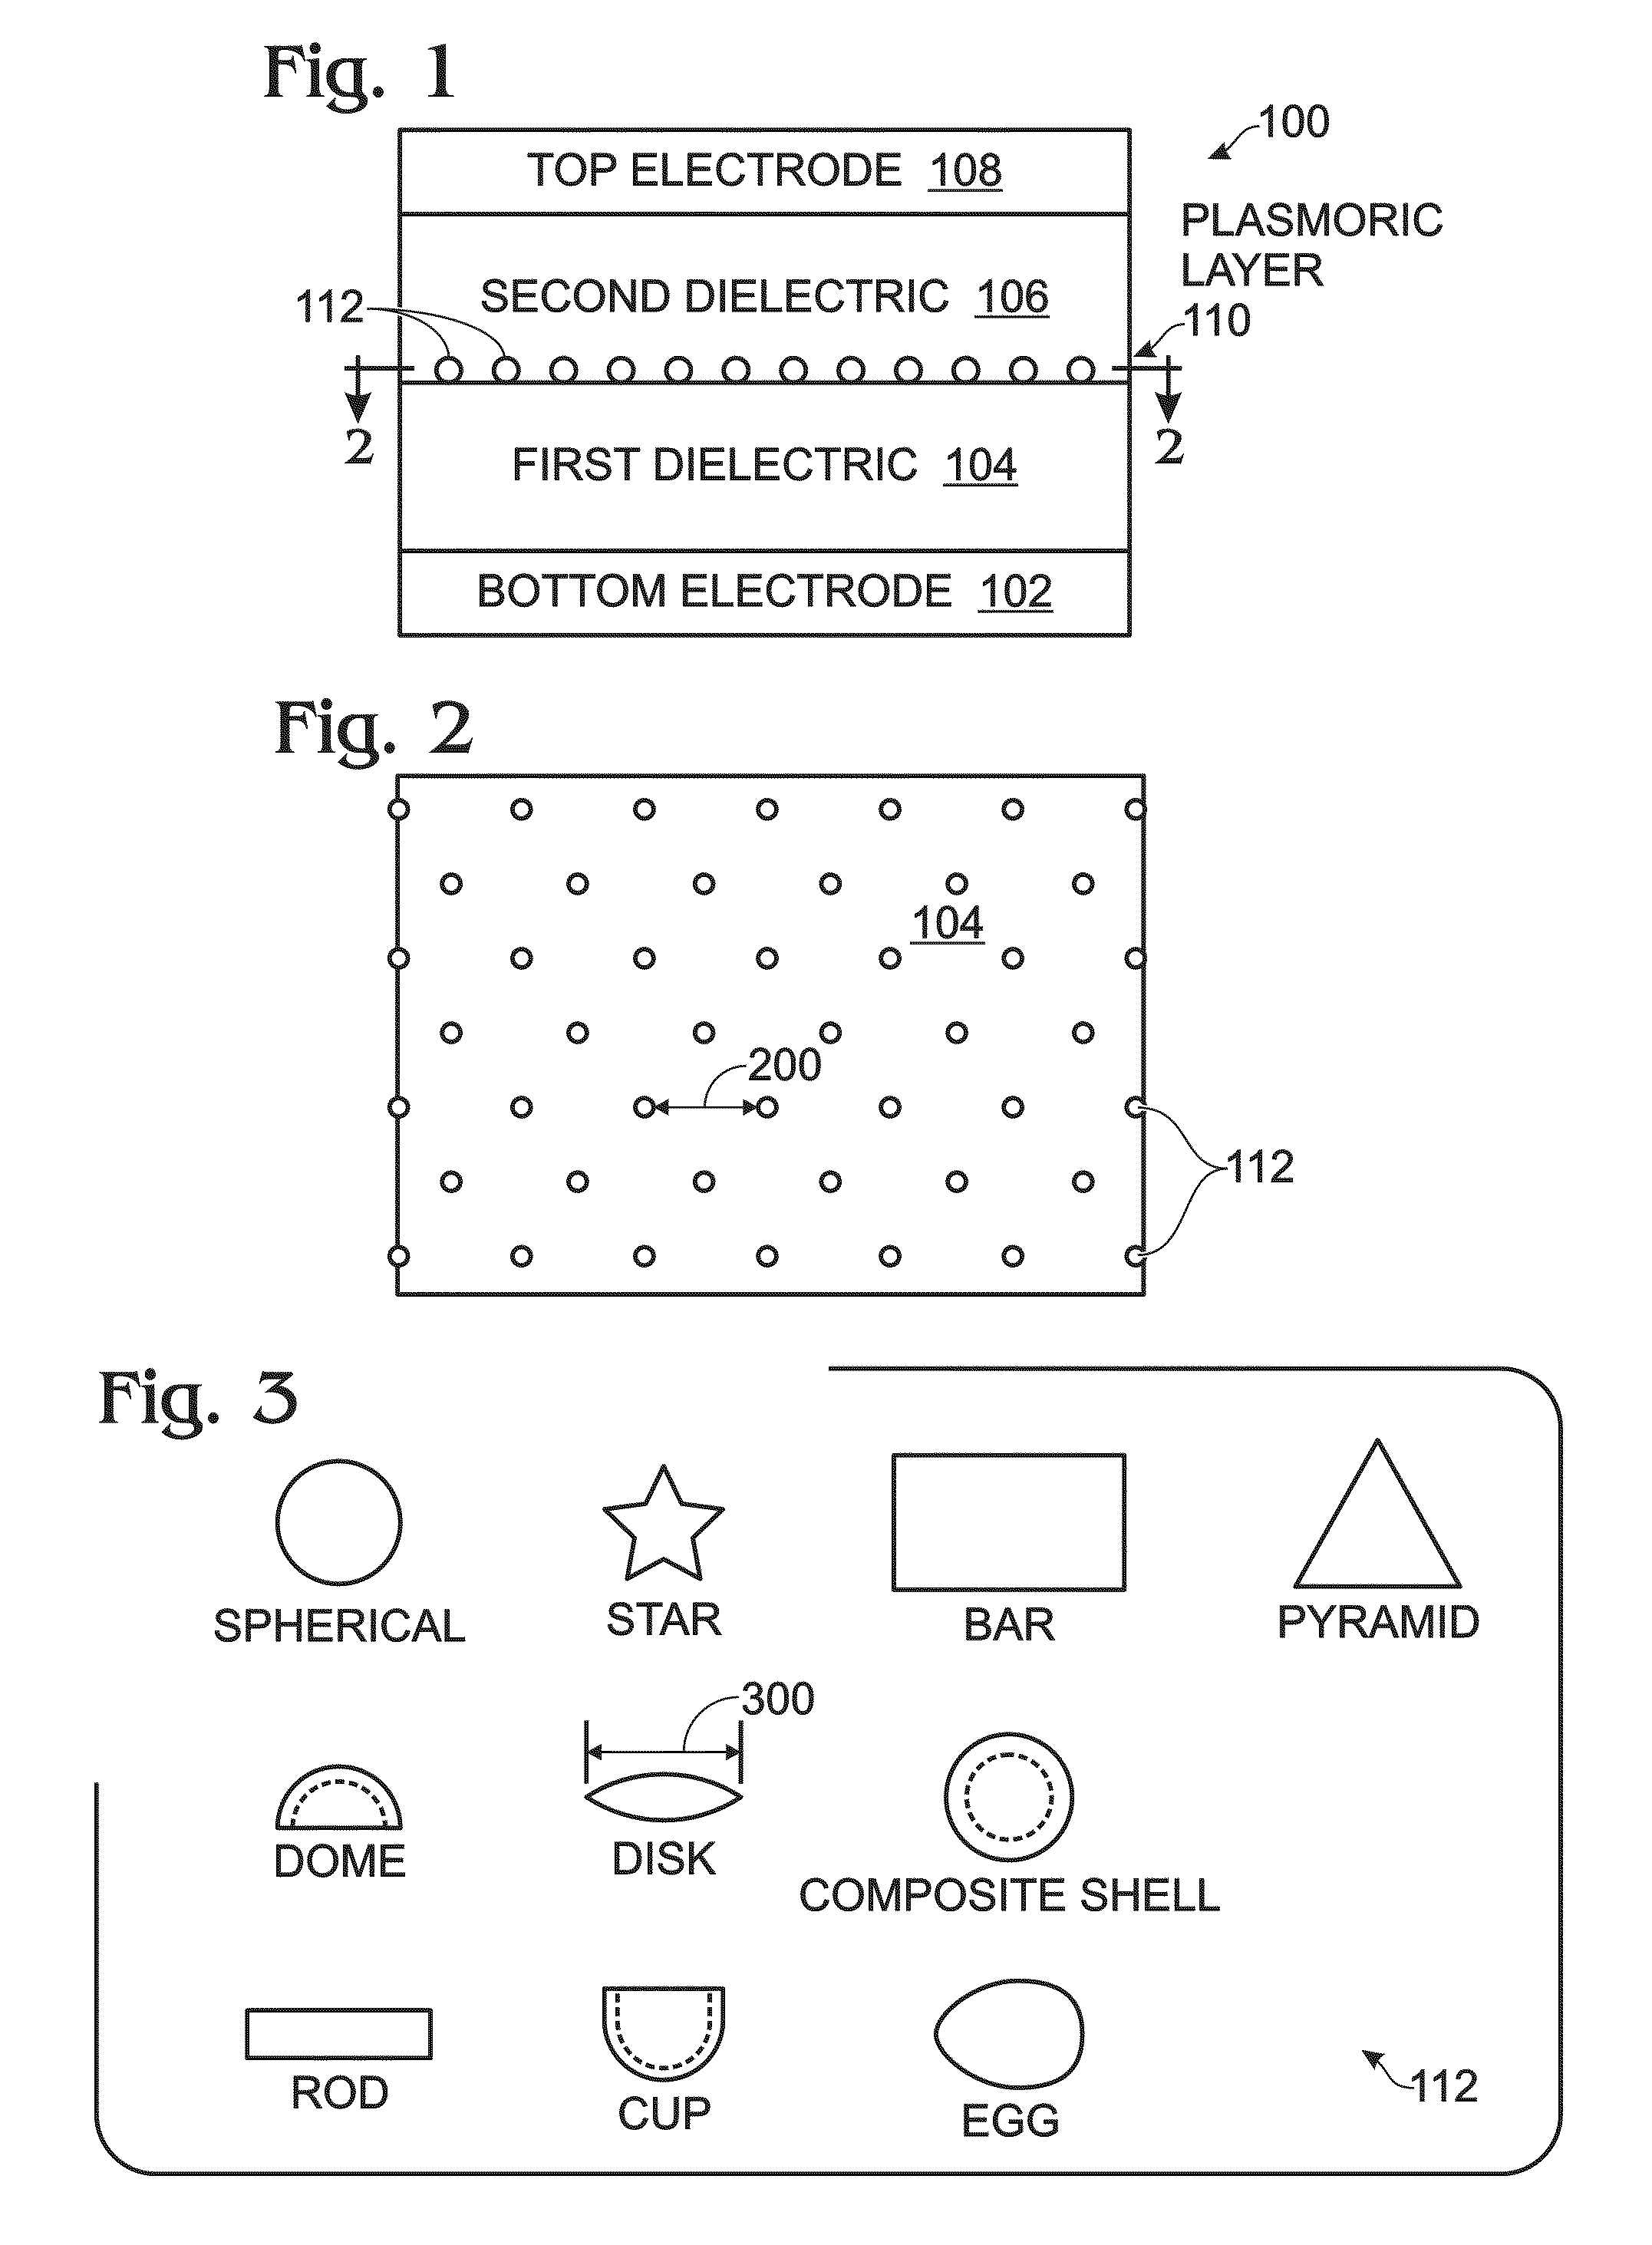 Color-tunable plasmonic device with a partially modulated refractive index